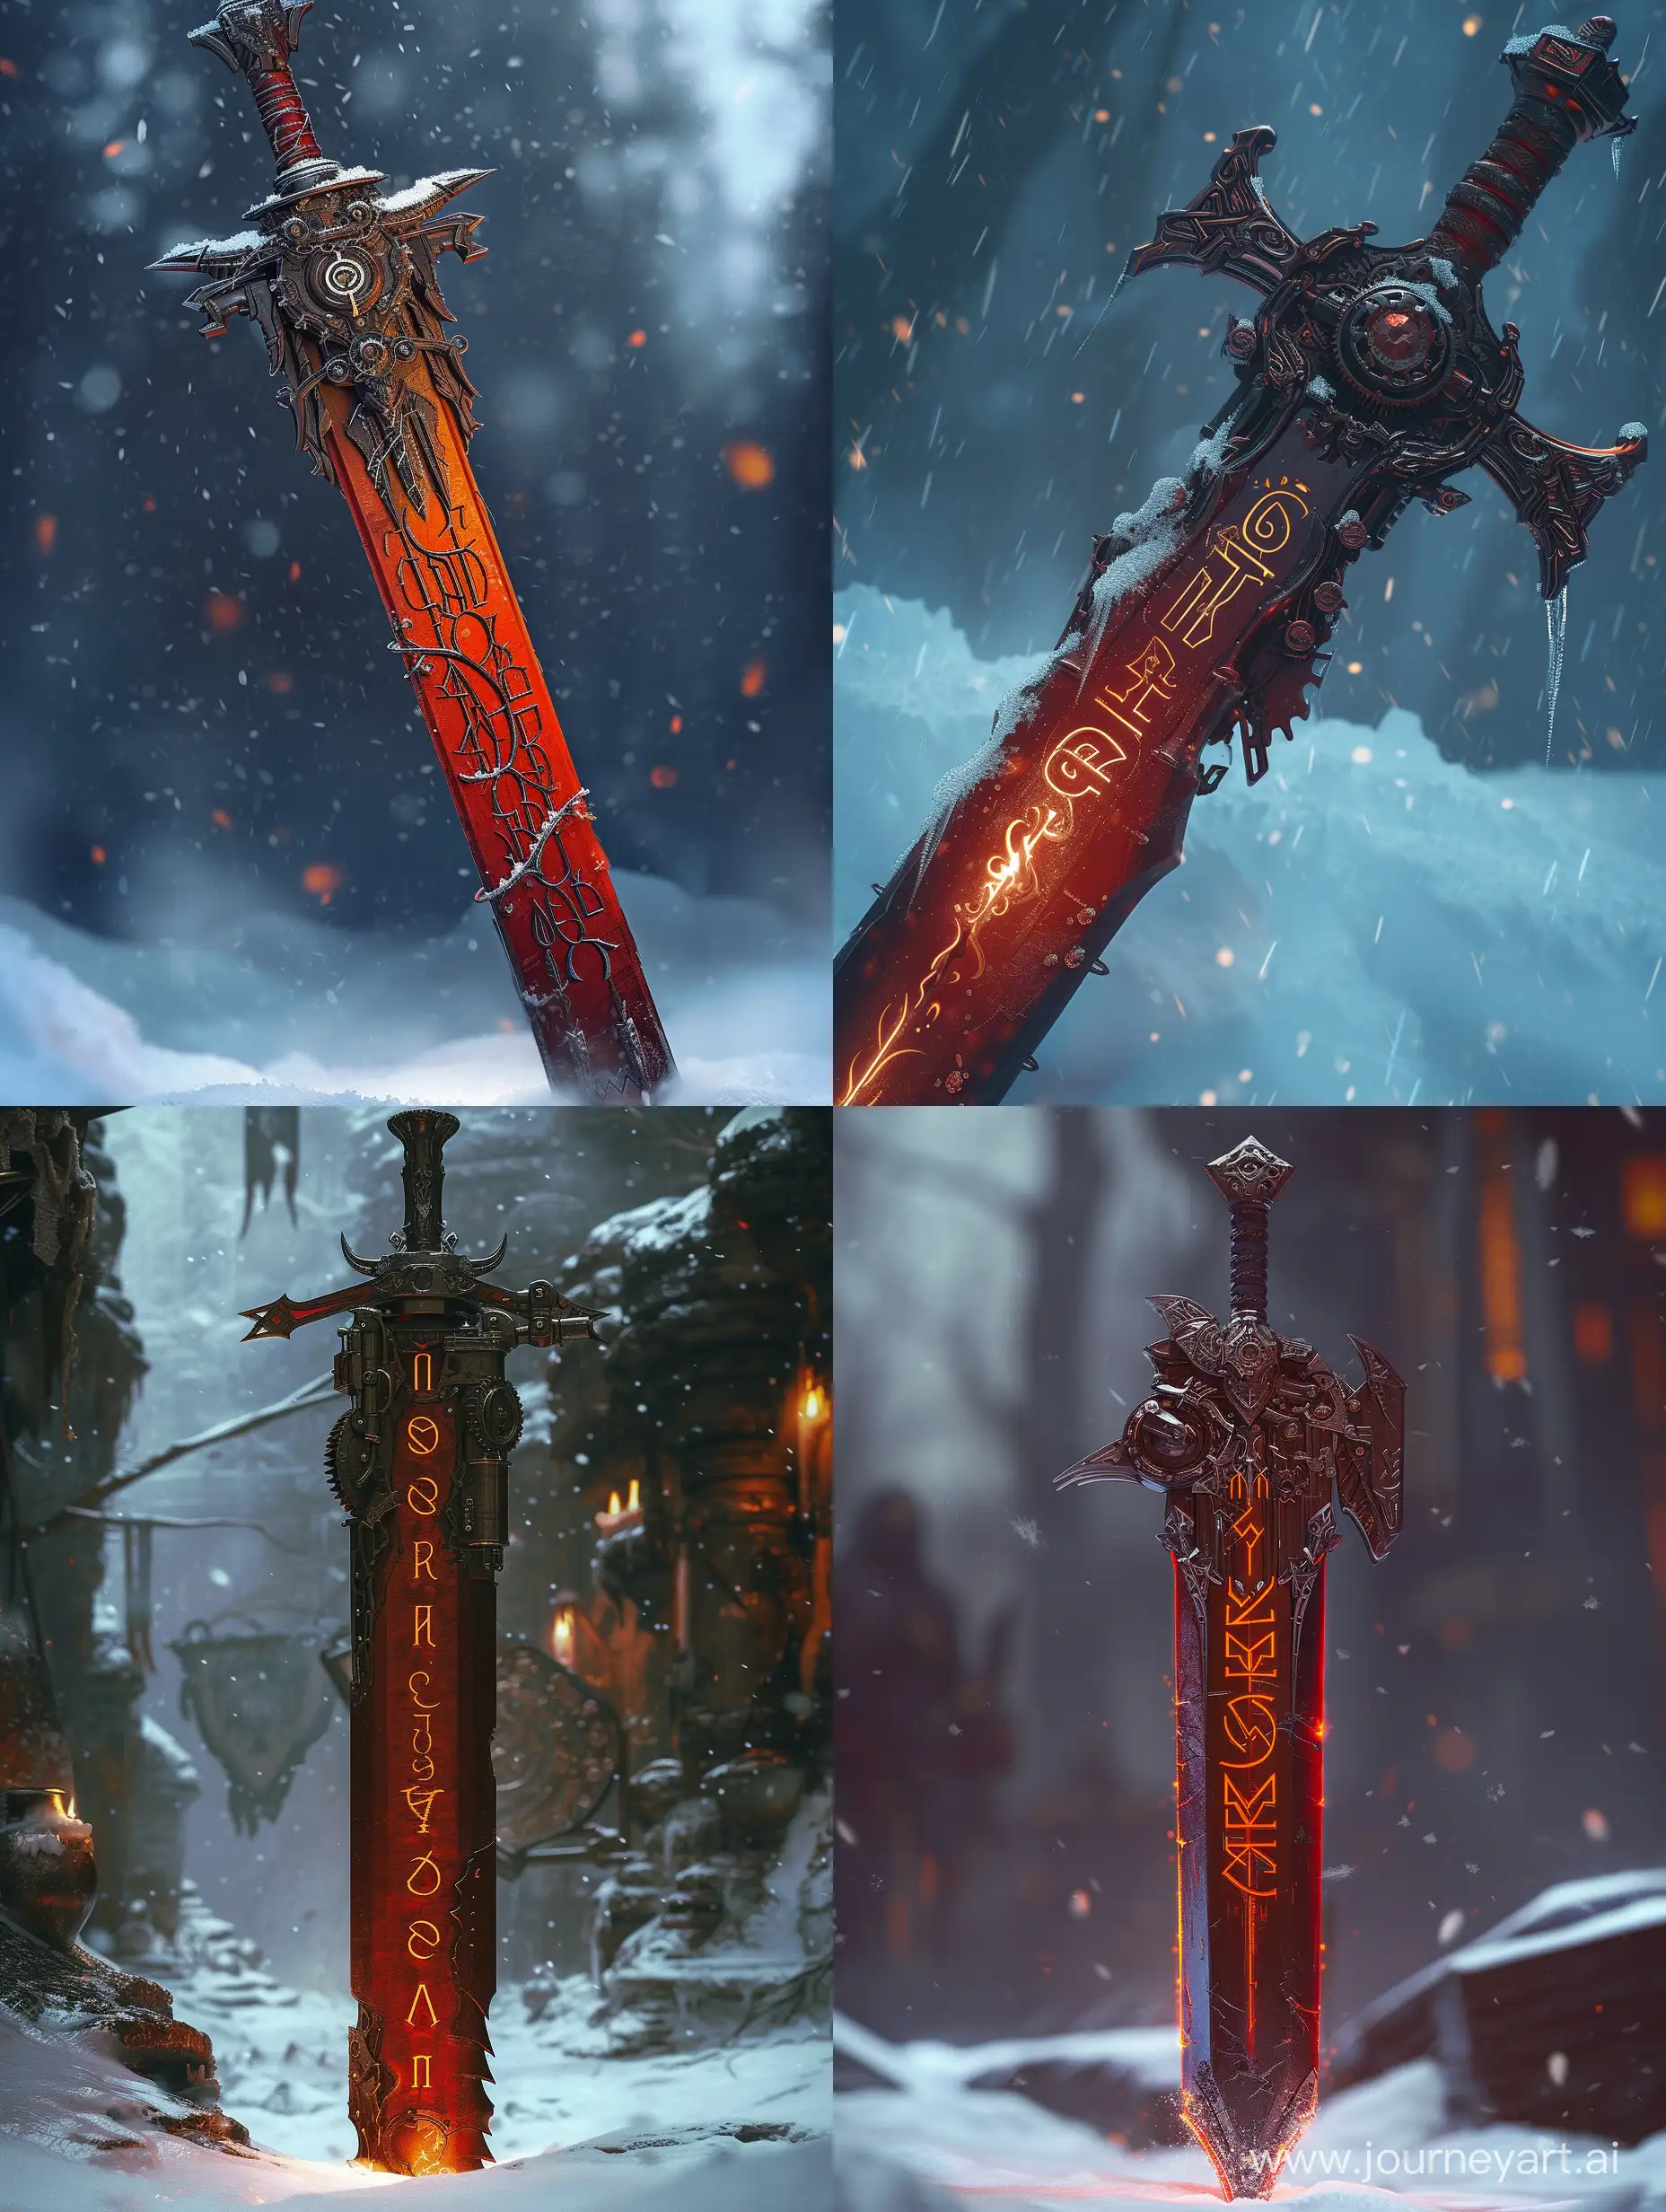 red queen sword with engine,runic letters curving on it,intricate curving,snow,steampunk.incredible detail,warm light,terrifying,Digital Art.